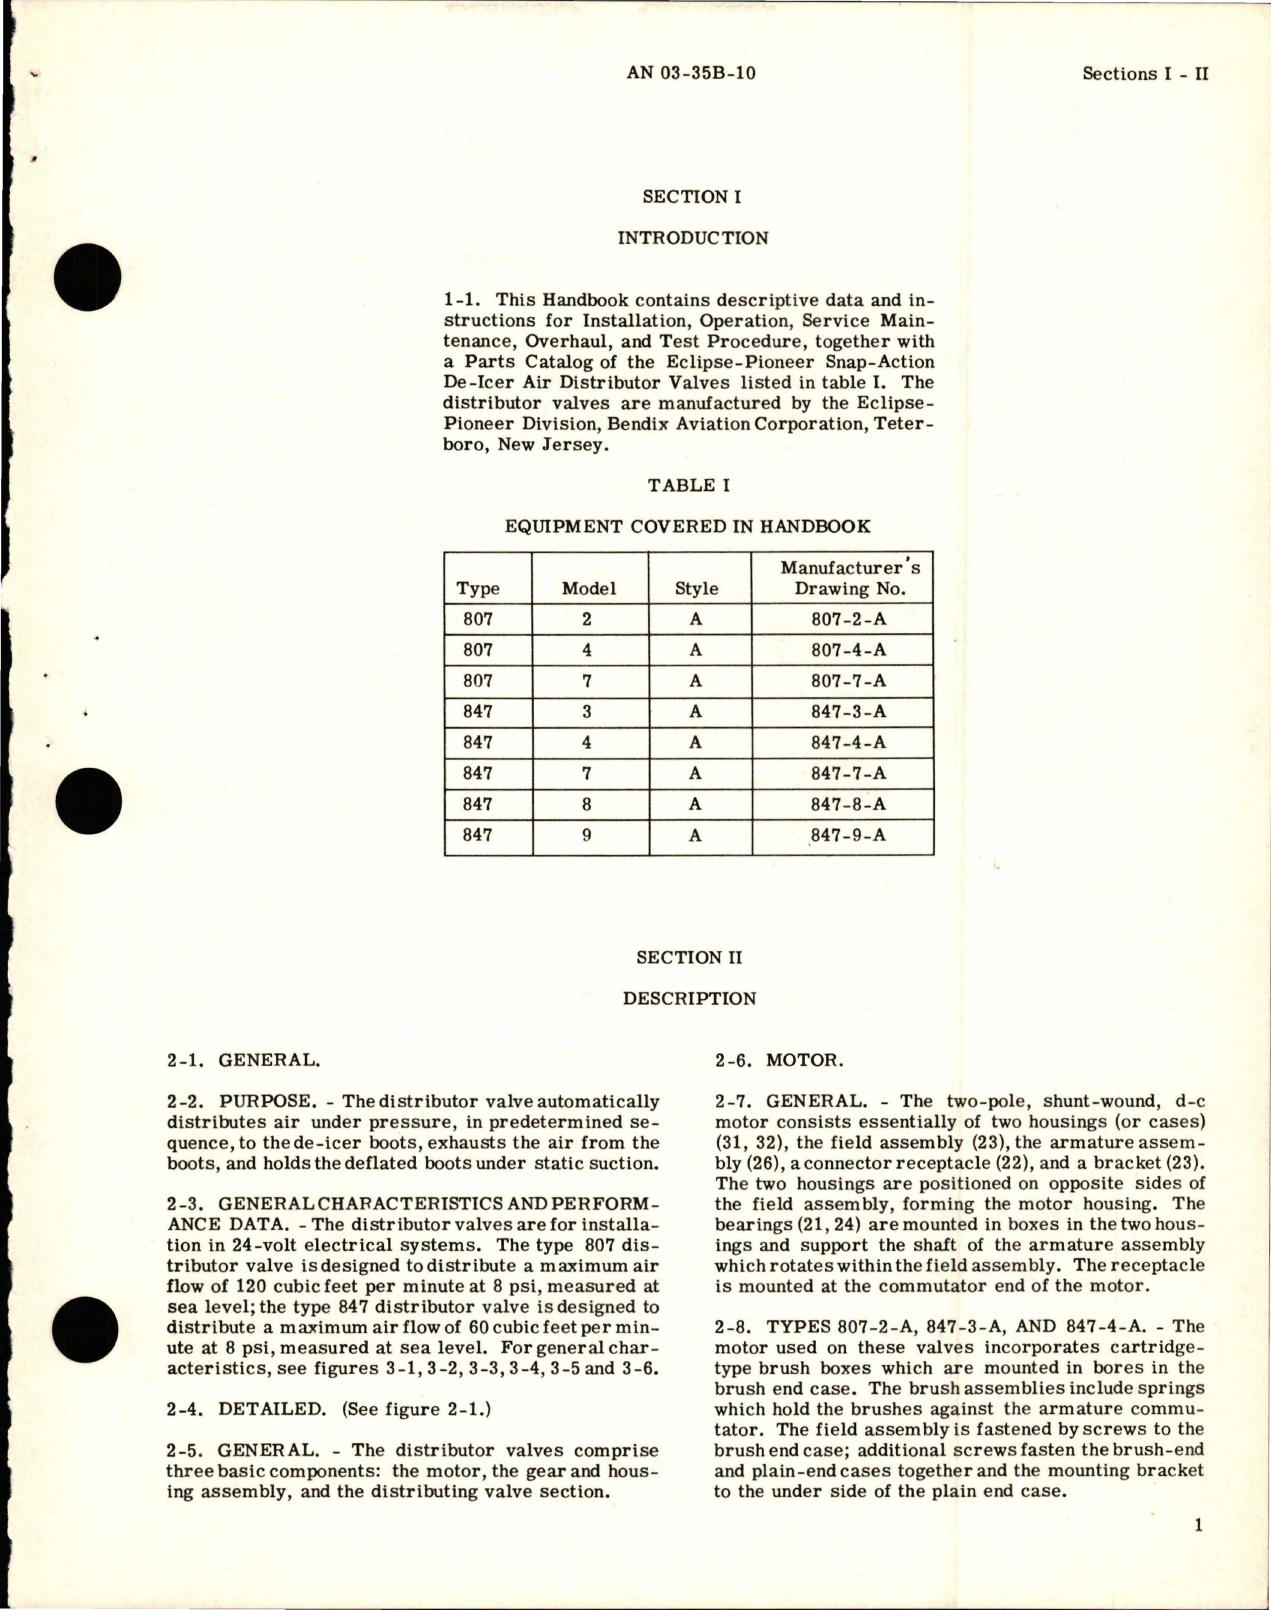 Sample page 7 from AirCorps Library document: Operation, Service, and Overhaul Instructions with Parts Catalog for Snap-Action De-Icer Air Distribution Valves - Types 807 and 847